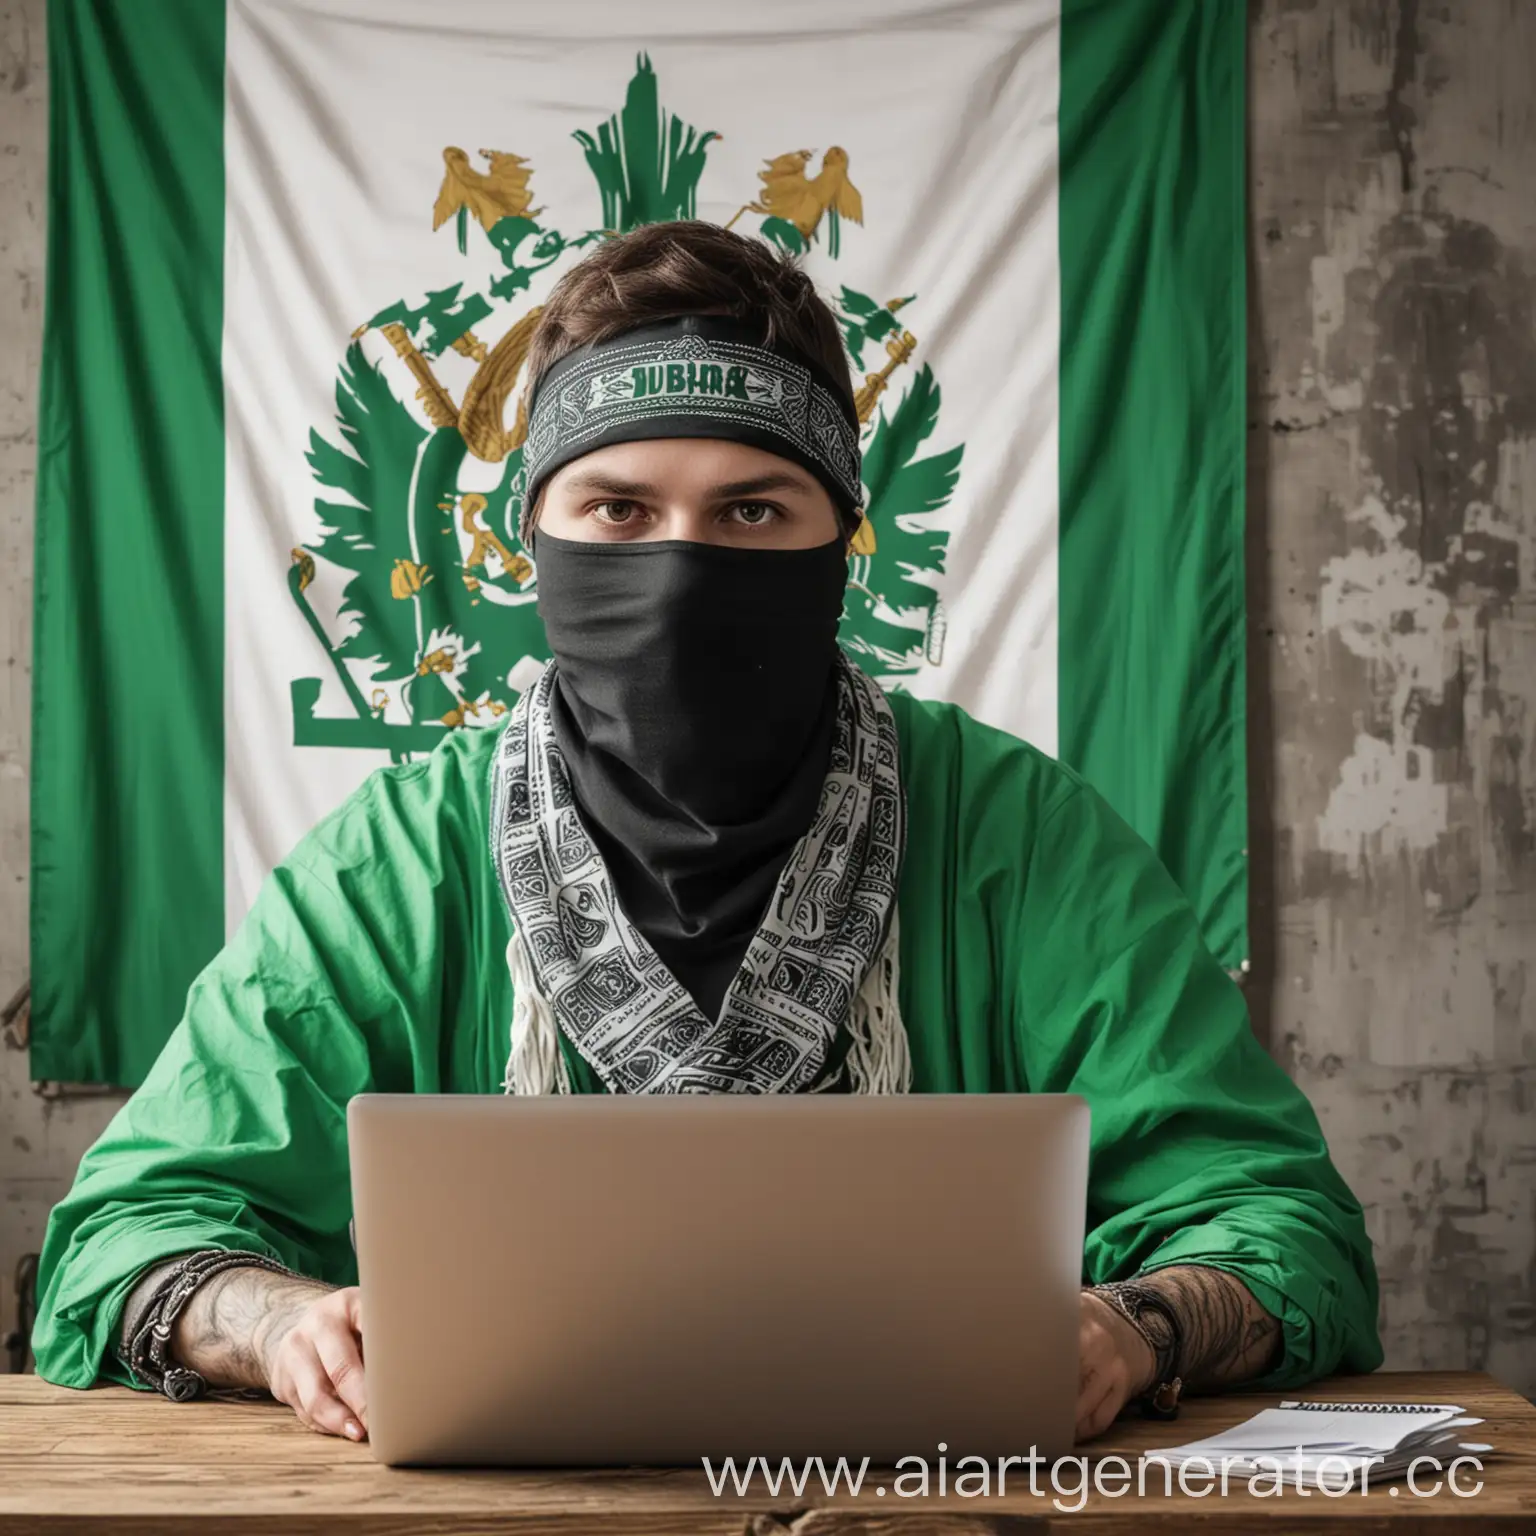 Hacker-with-Bandana-at-Laptop-with-Siberian-Flag-on-Wall